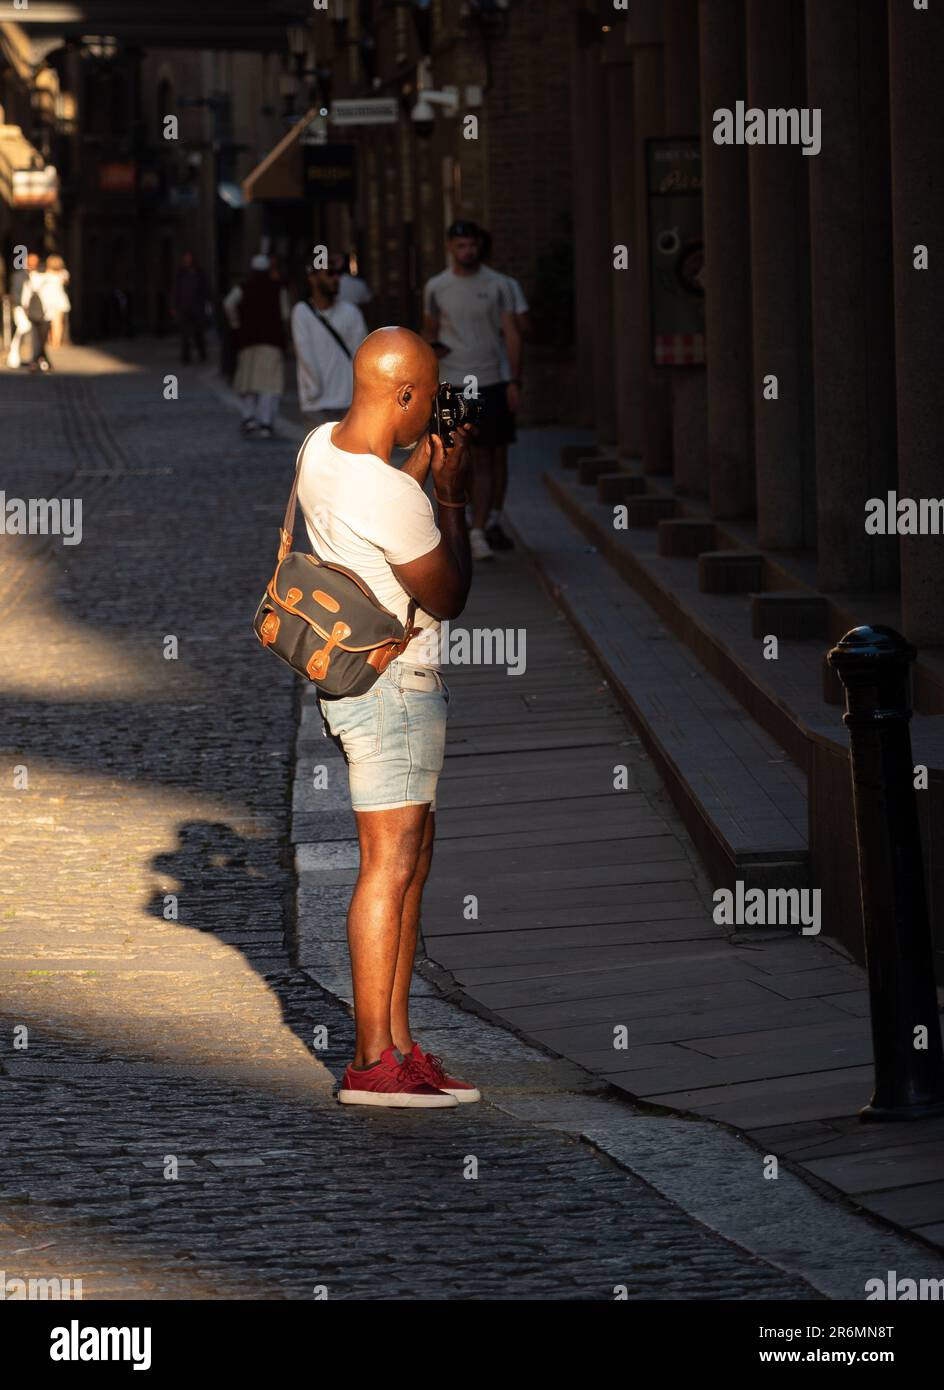 London, England, UK - July 10, 2022: An artist photographer in London who takes pictures of architecture and is lit by a ray of sunlight at golden hou Stock Photo